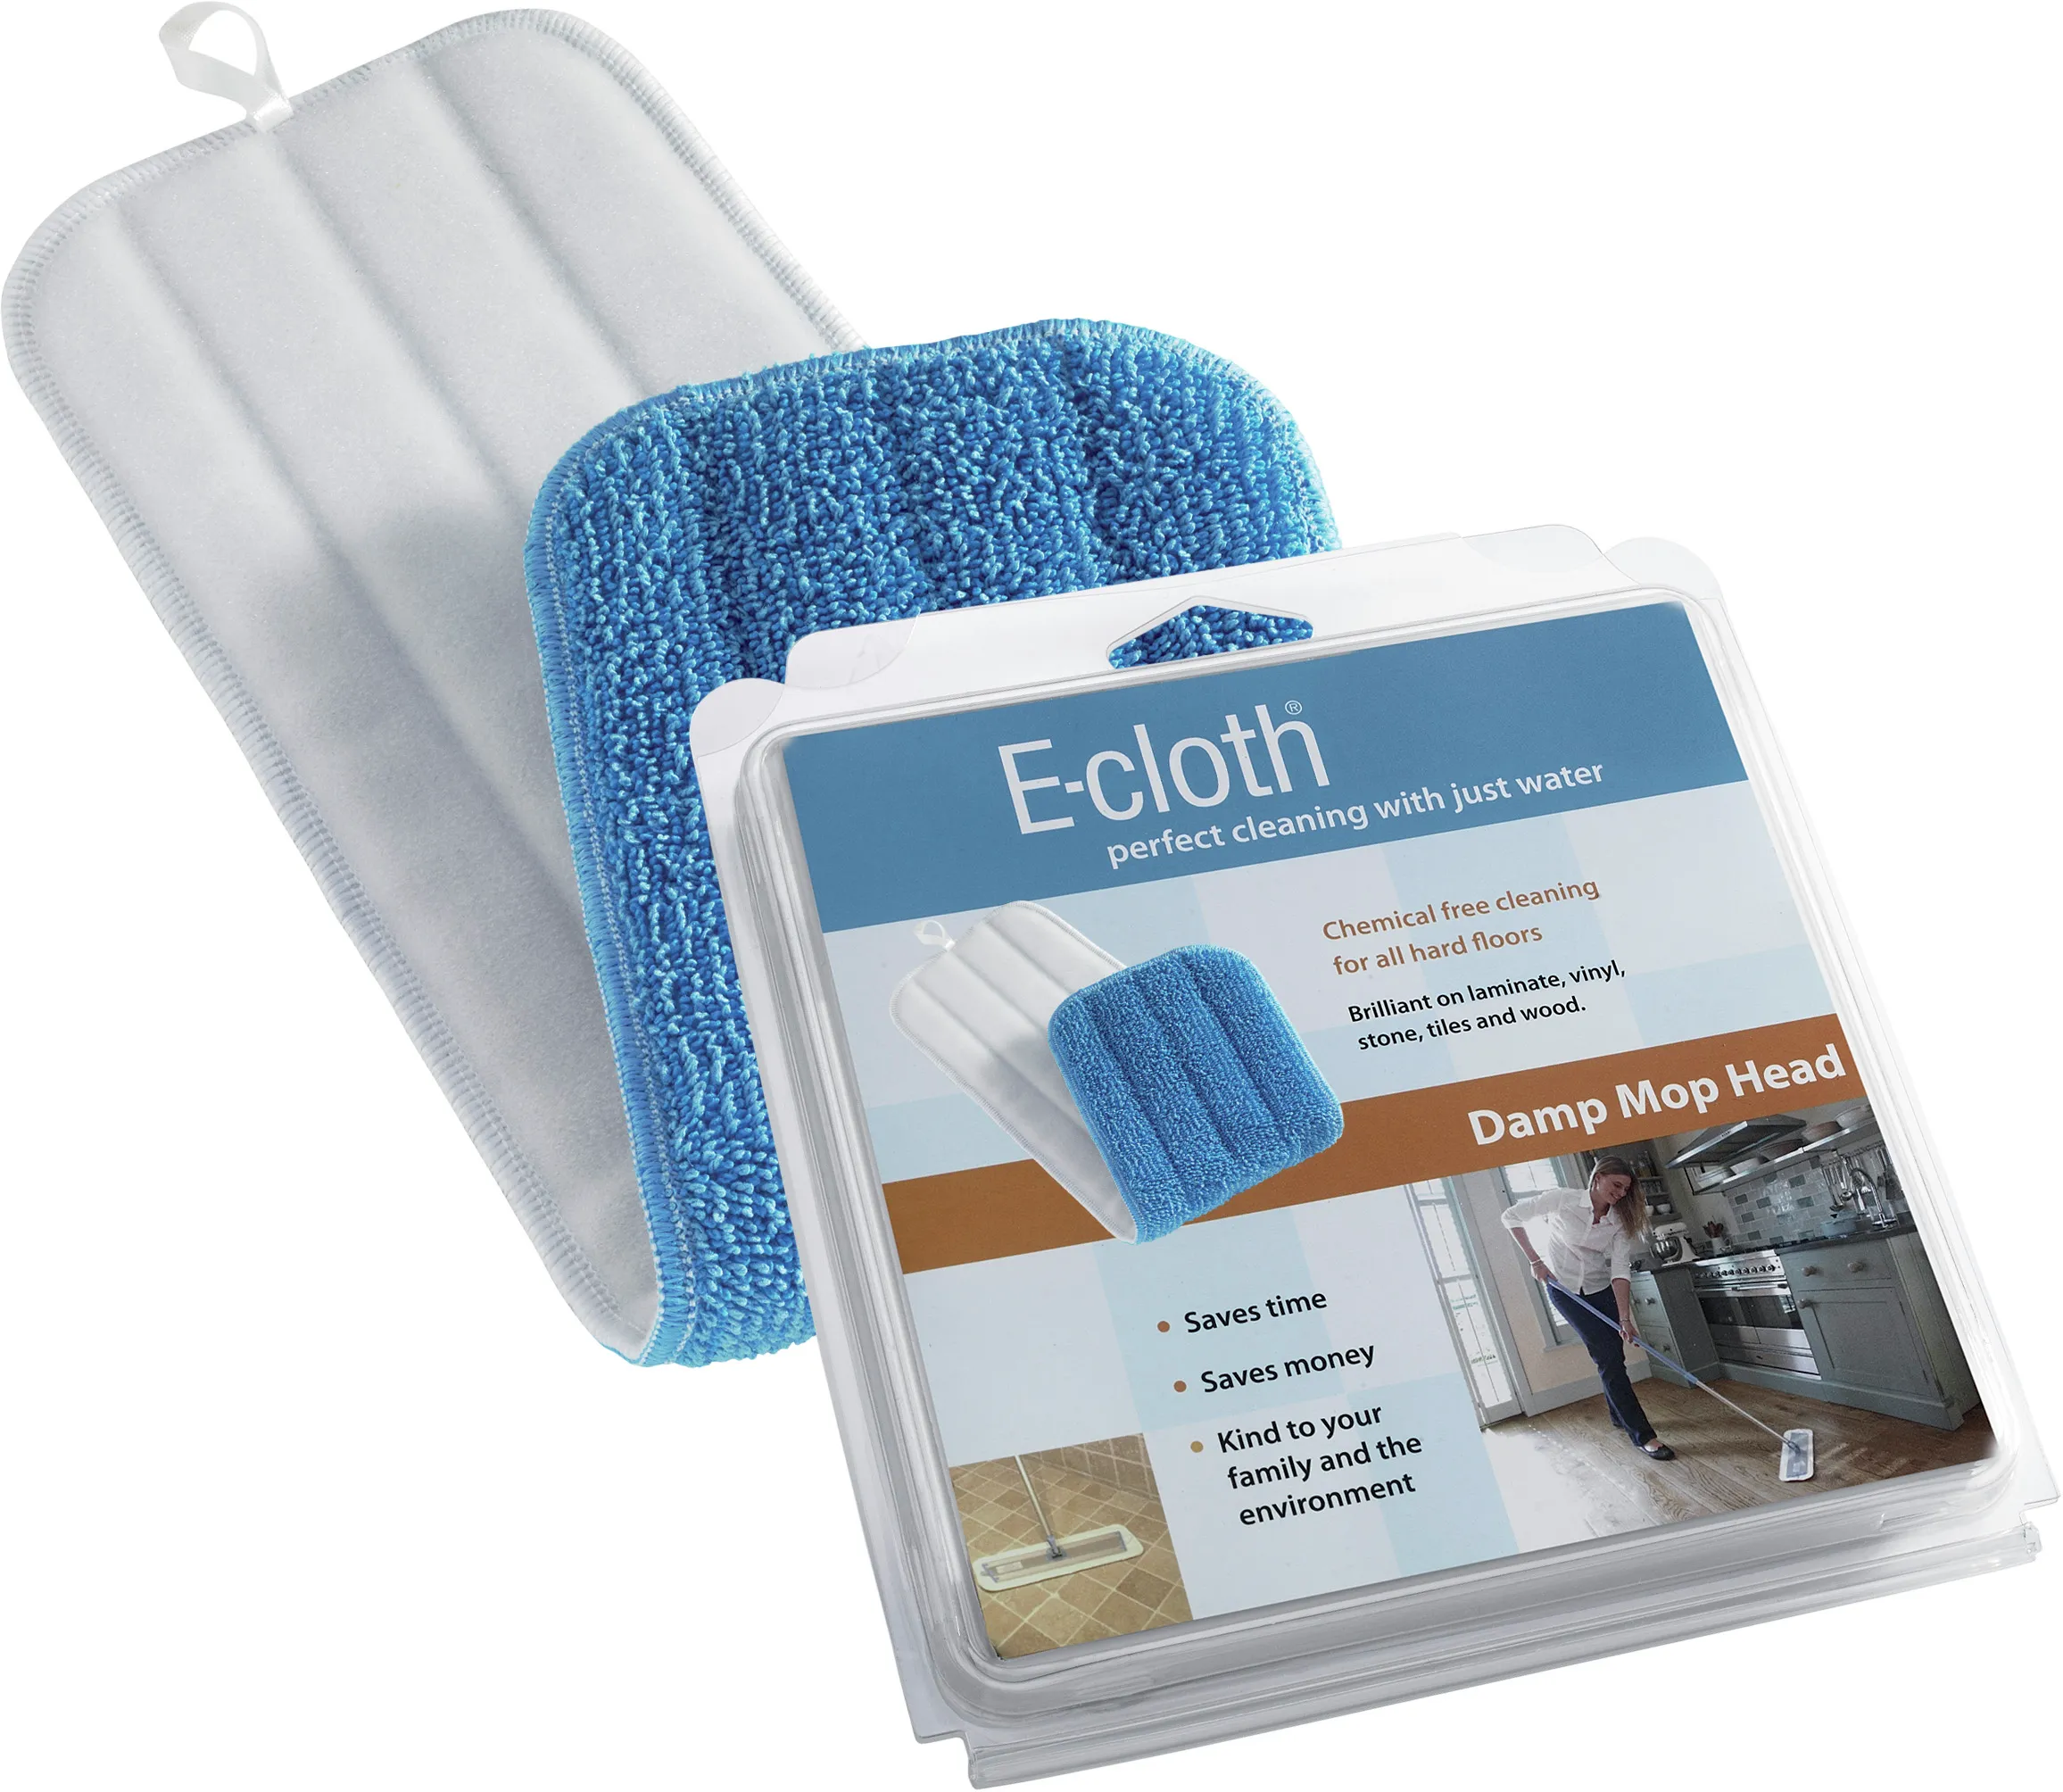 Deep Clean Mop Head For use with E-cloth Mop 